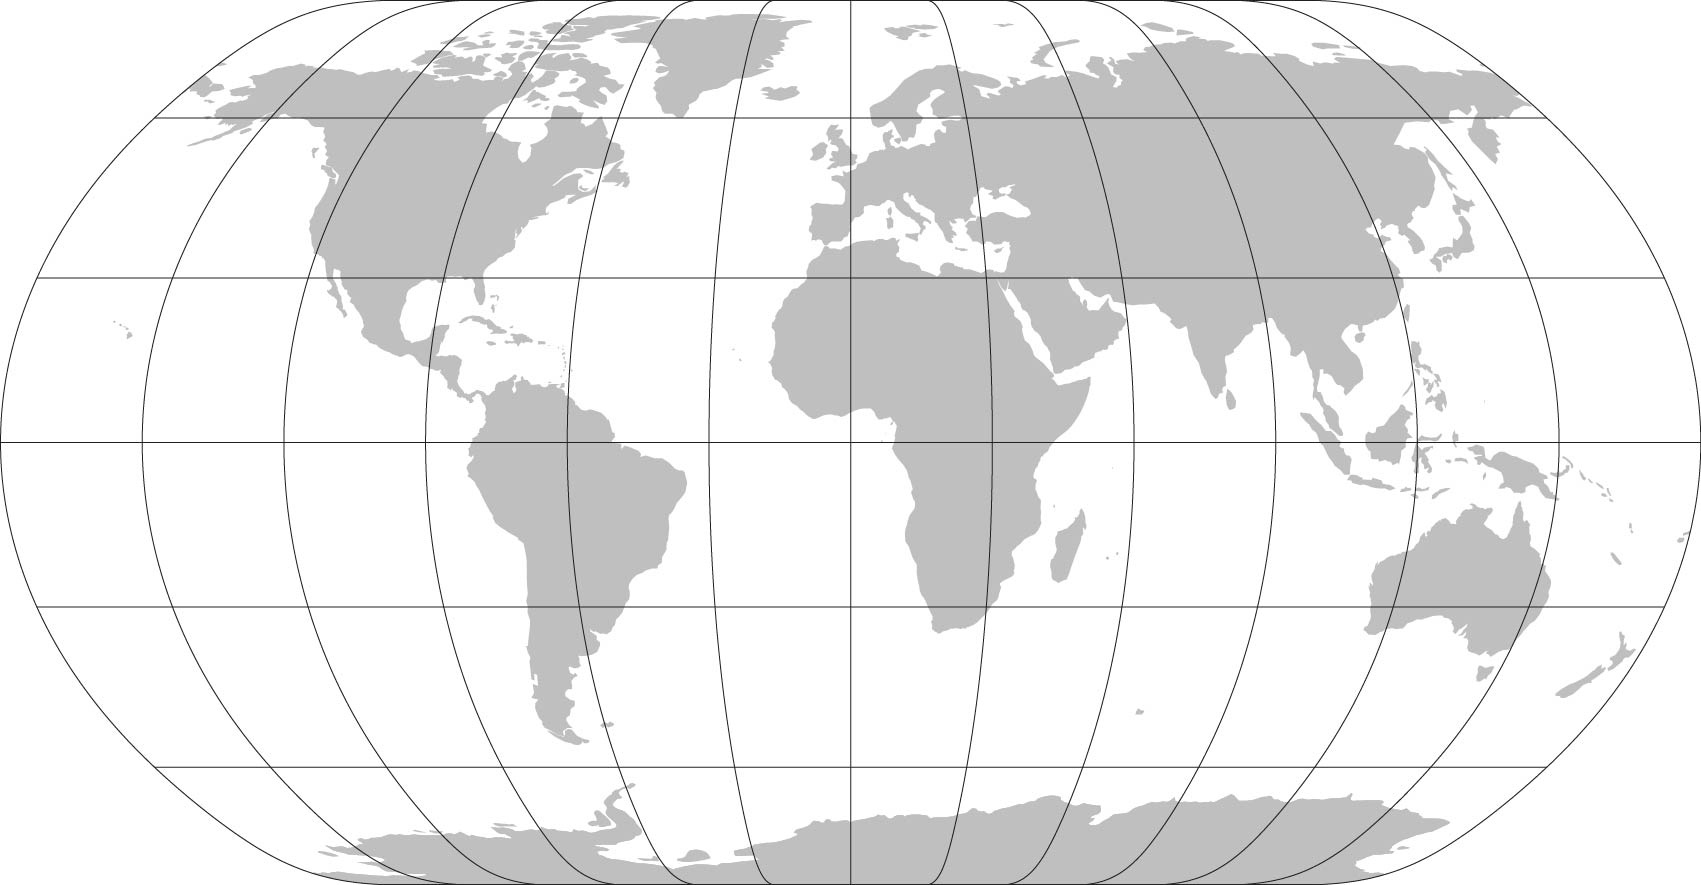 The Natural Earth projection